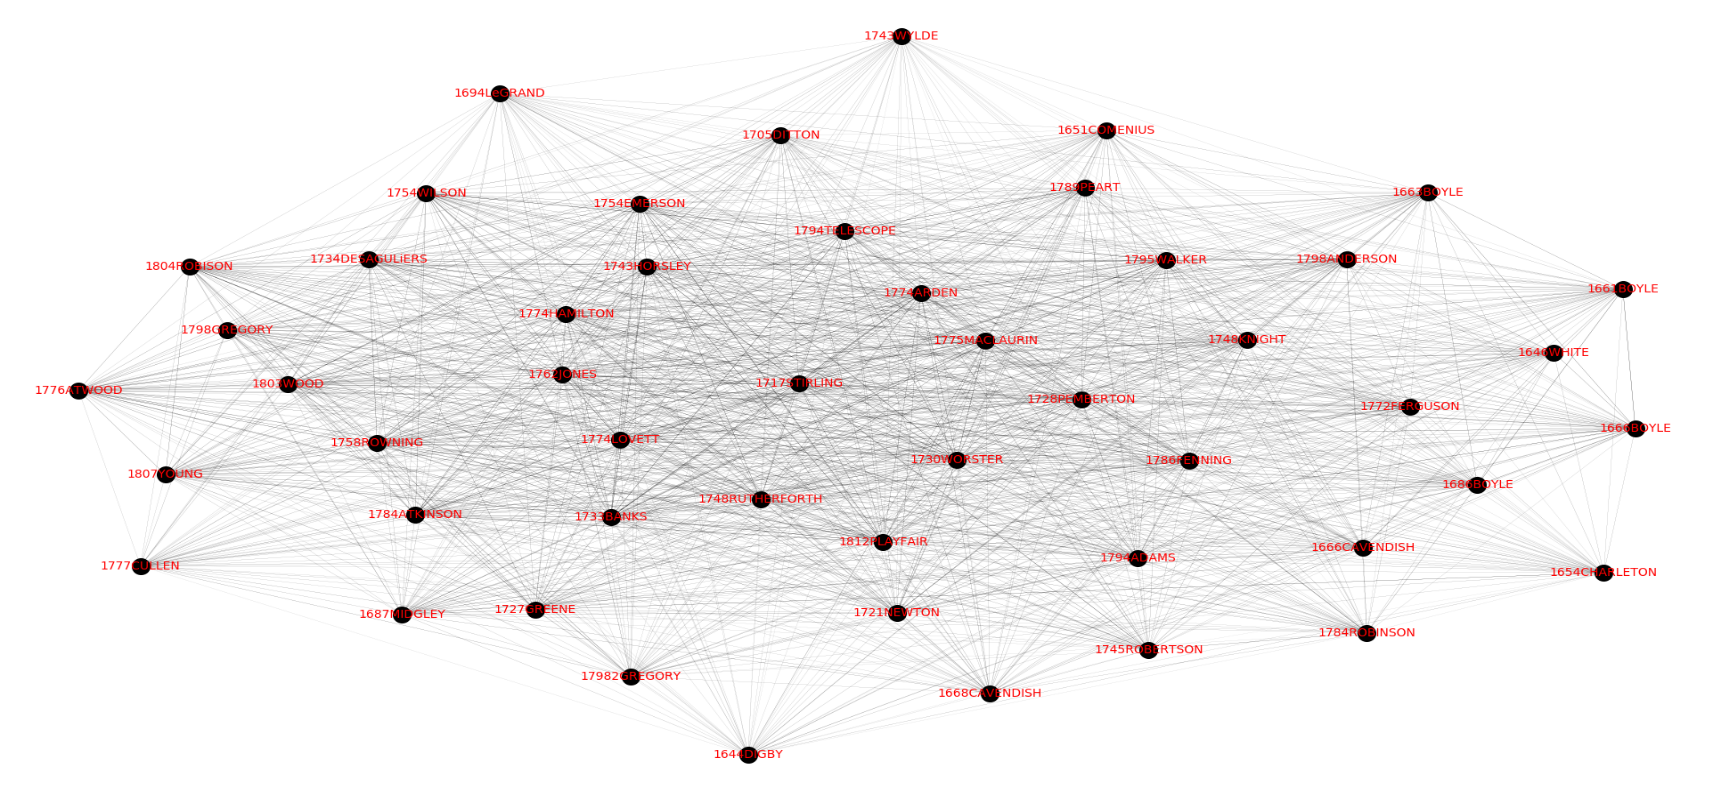 Image of a network graph with several hundred edges connecting various nodes which are identified with red text